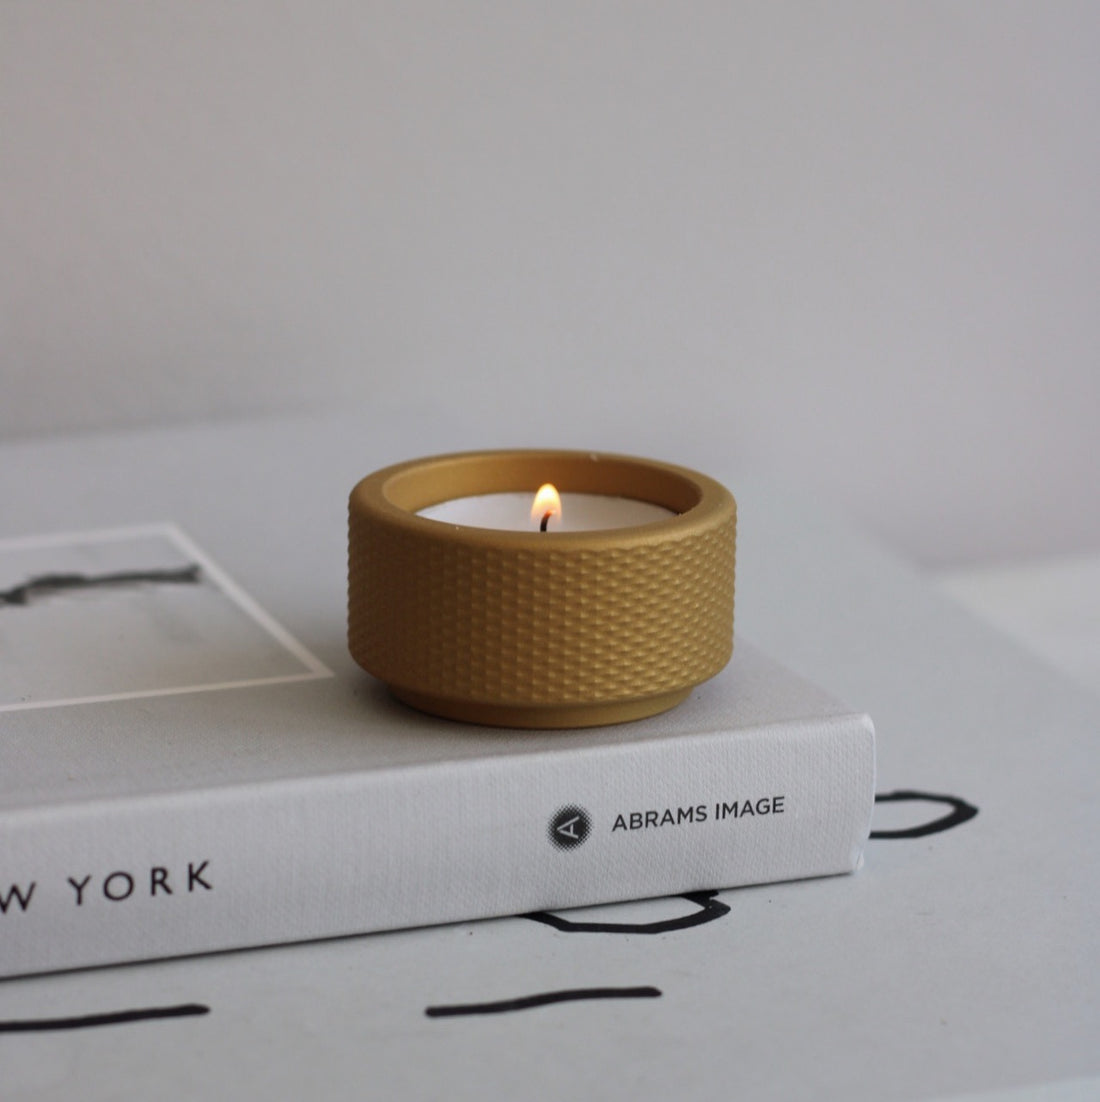 ceramic gold tea light candle holder for Christmas gift or Christmas decoration. styled on New York cereal magazine. Scandinavian interior design styling. modern and contemporary. knurled decoration. brass home decor. candle holder gift. housewarming gift.  styled by adrestiasrevolt.co.uk